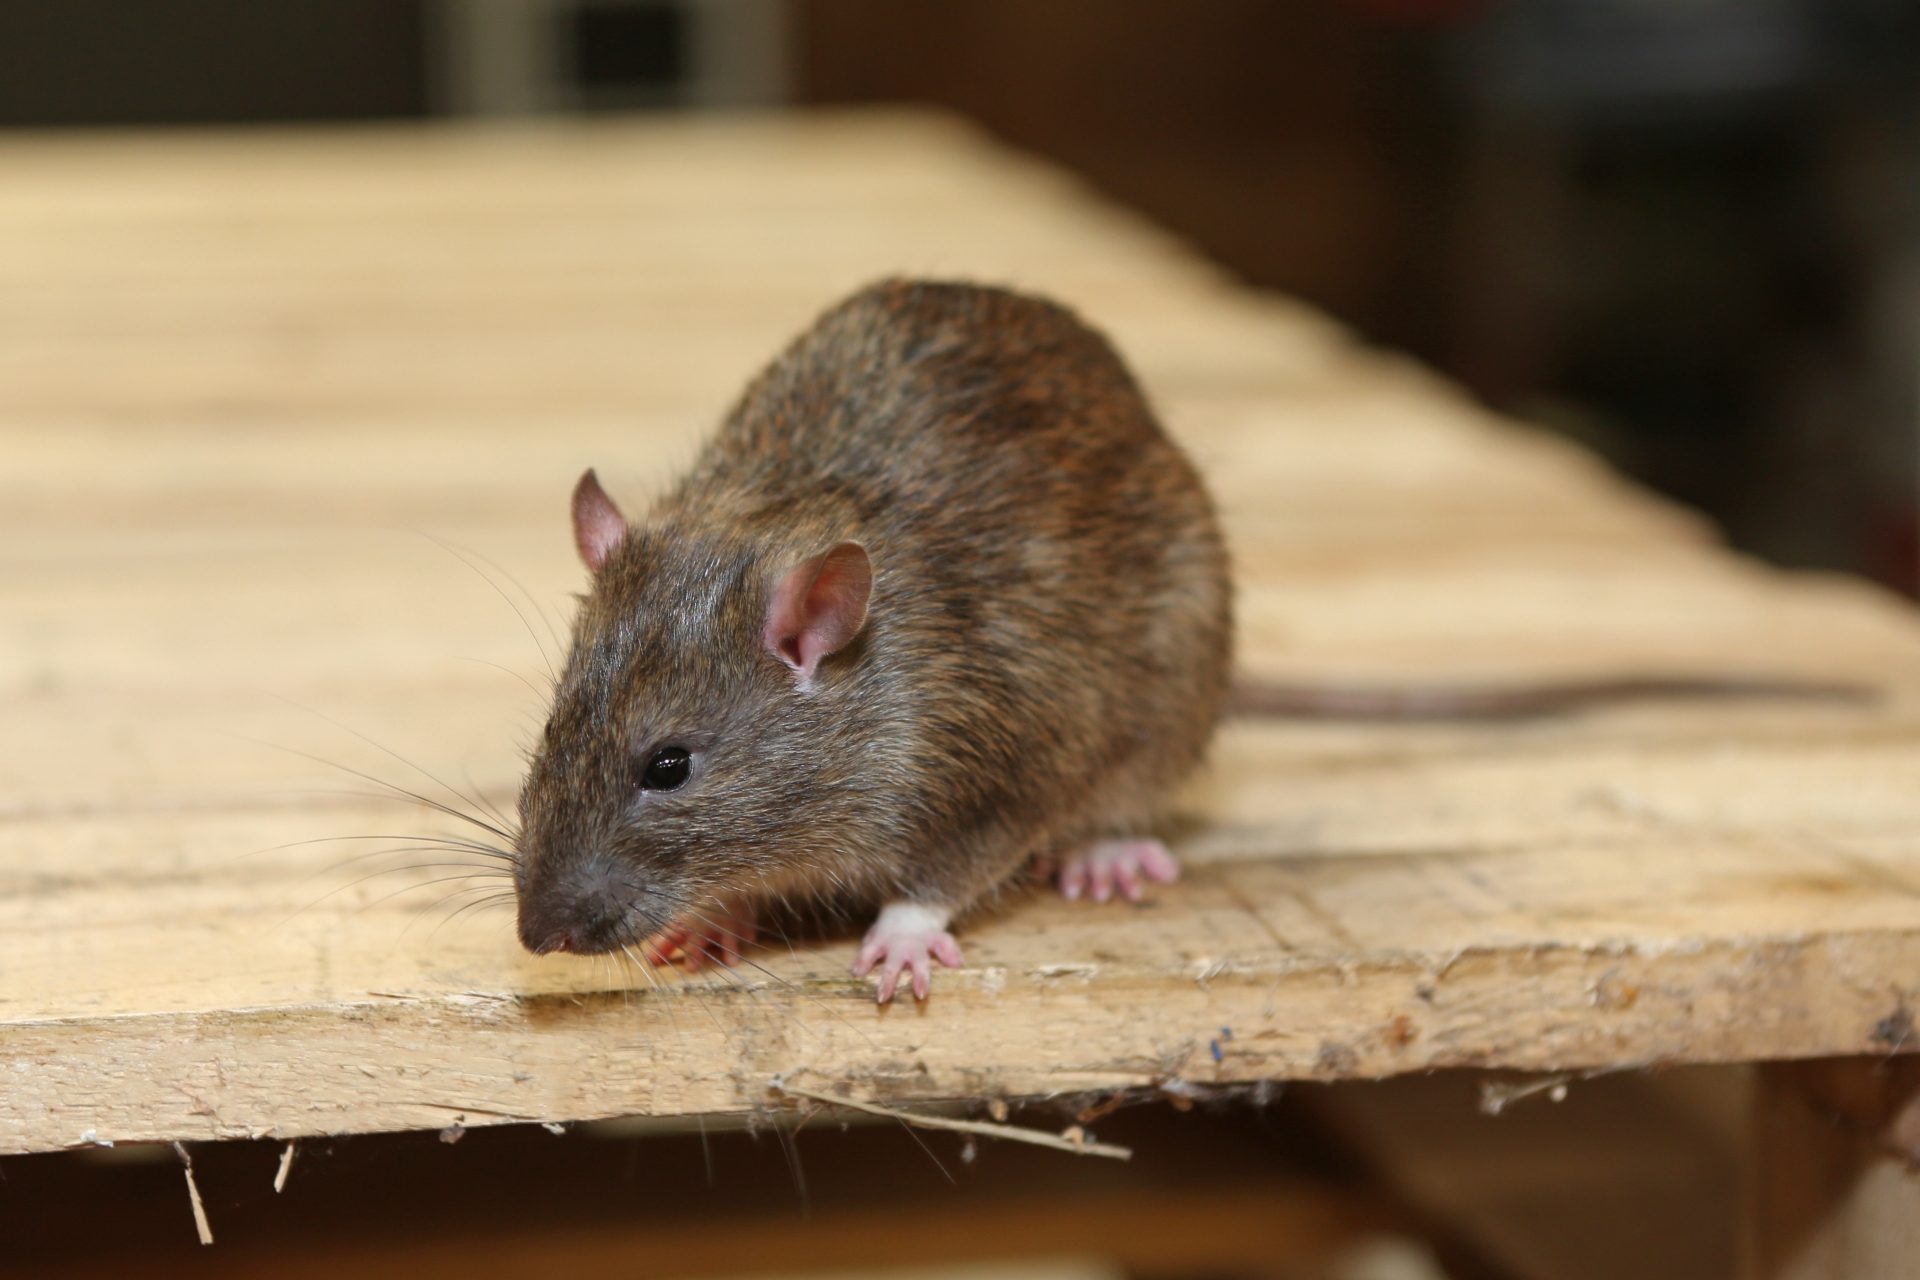 Rat Infestation, Pest Control in Stanmore, Queensbury, HA7. Call Now 020 8166 9746